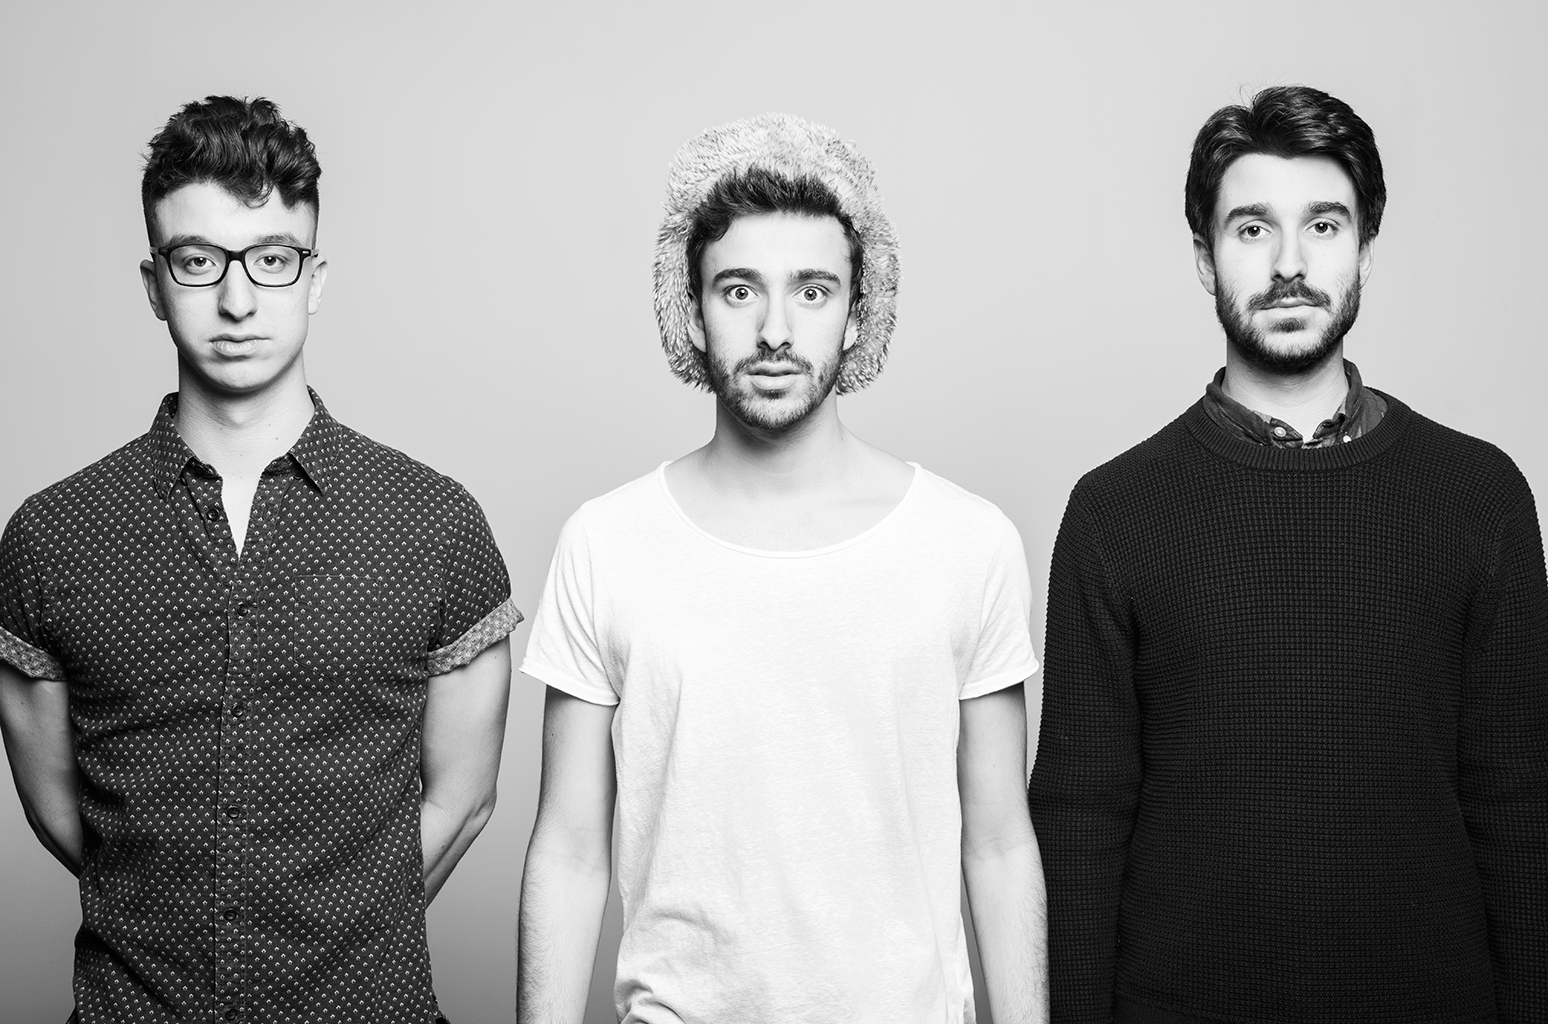 AJR Laugh About Their Failures In New Single '100 Bad Days' Billboard